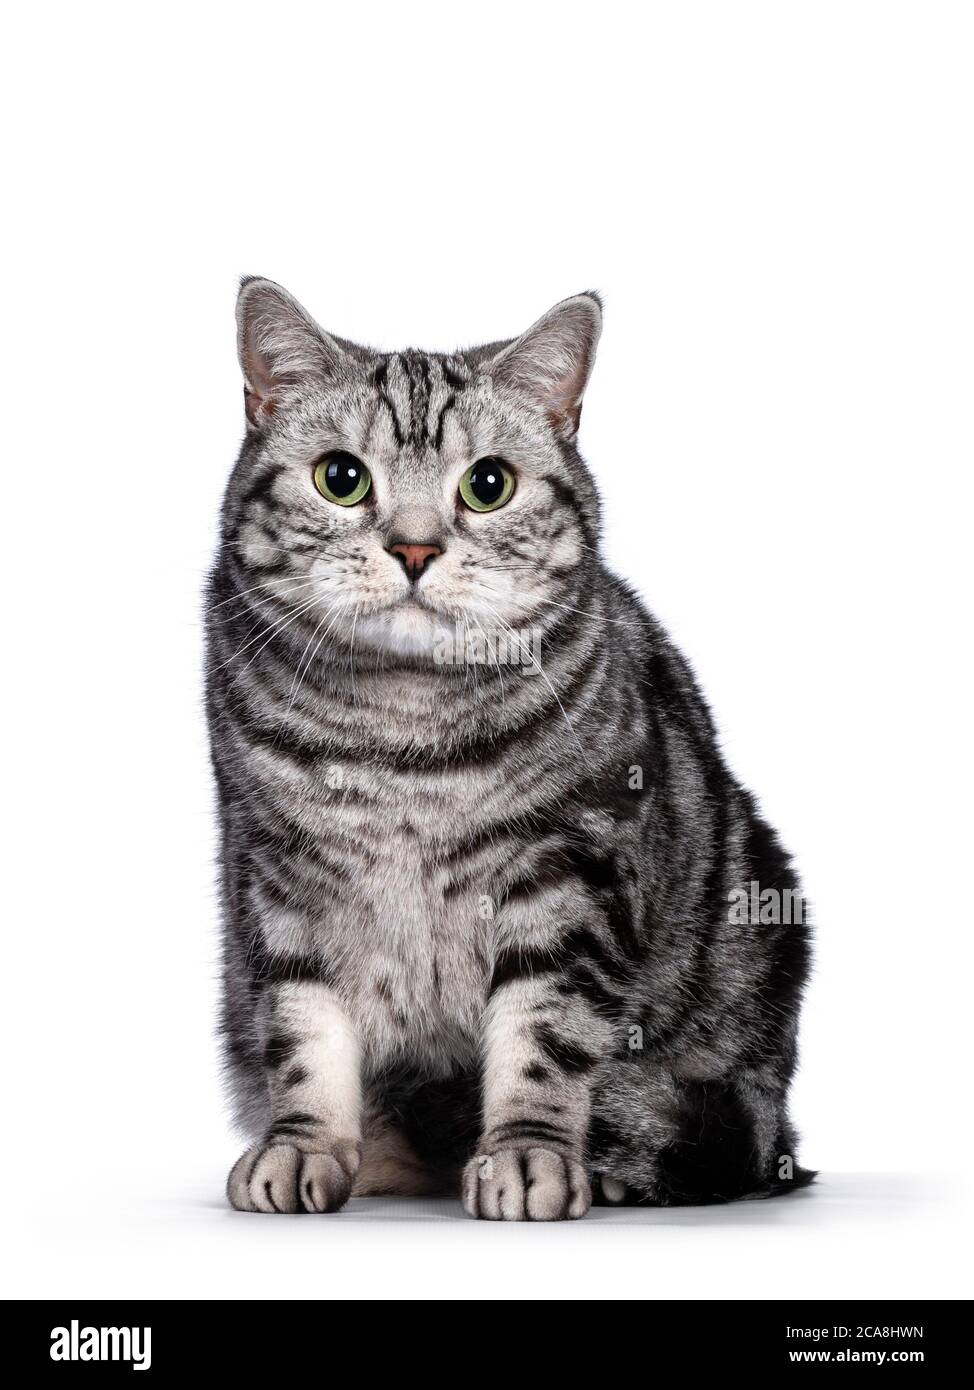 Handsome silver tabby blotched British Shorthair adult male cat. sitting up facing front, looking towards camera with green eyes. Isolated on white ba Stock Photo